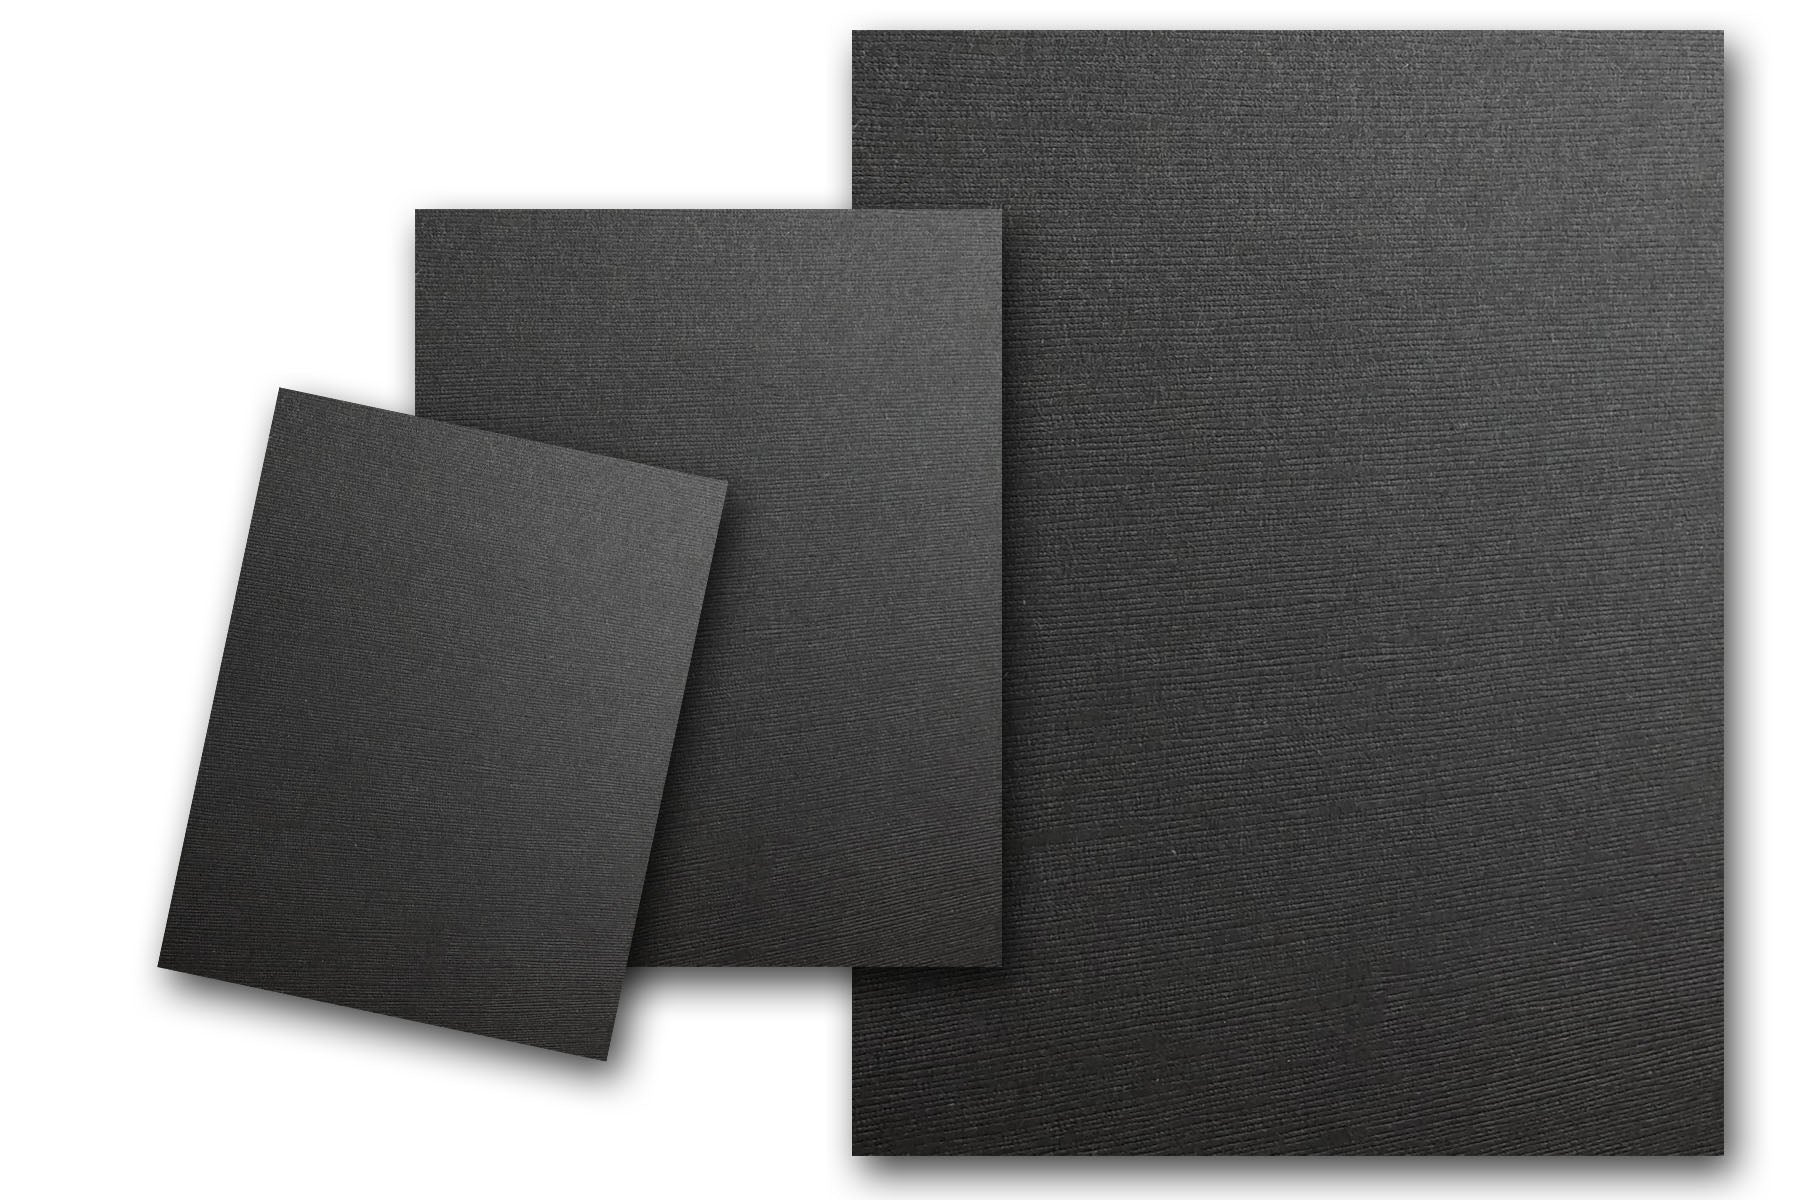 Leatherlike Black Card Stock - 28.3 x 40.2 in 133 lb Cover Traditional C1S  50 per Carton